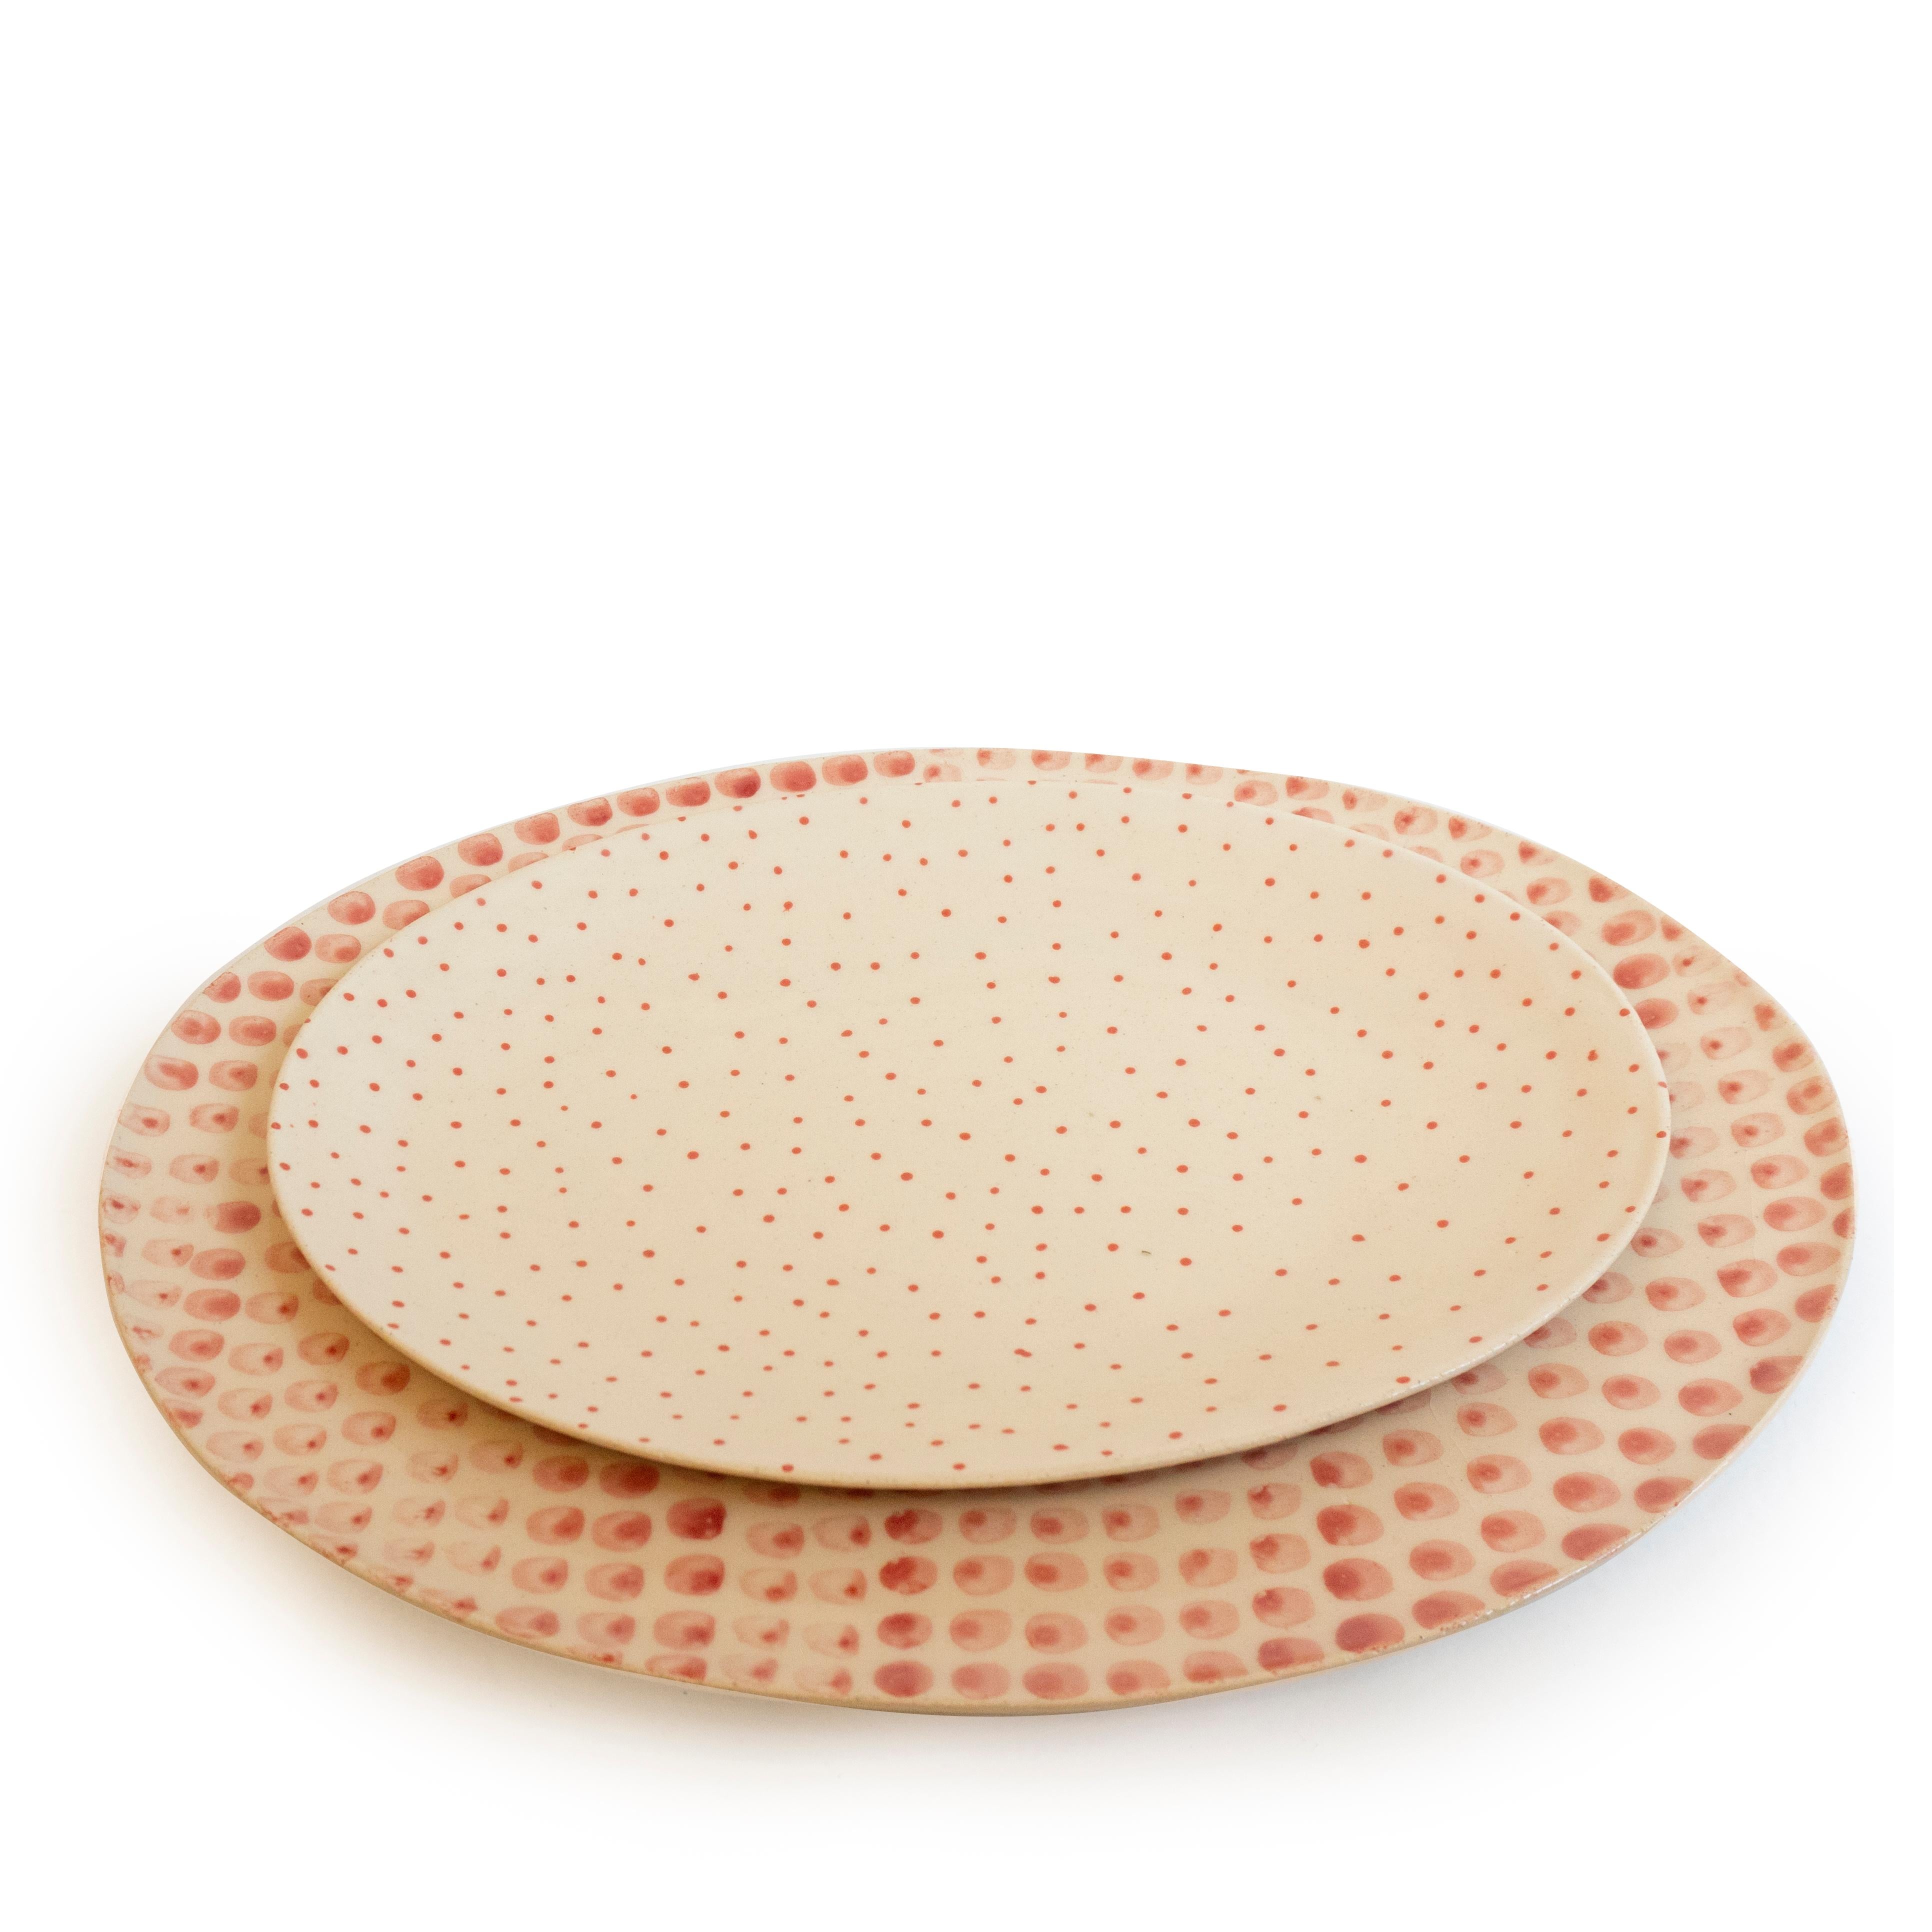 Organic Modern Hand Painted Ceramic Serving Platter with Sprinkled Dot Pattern